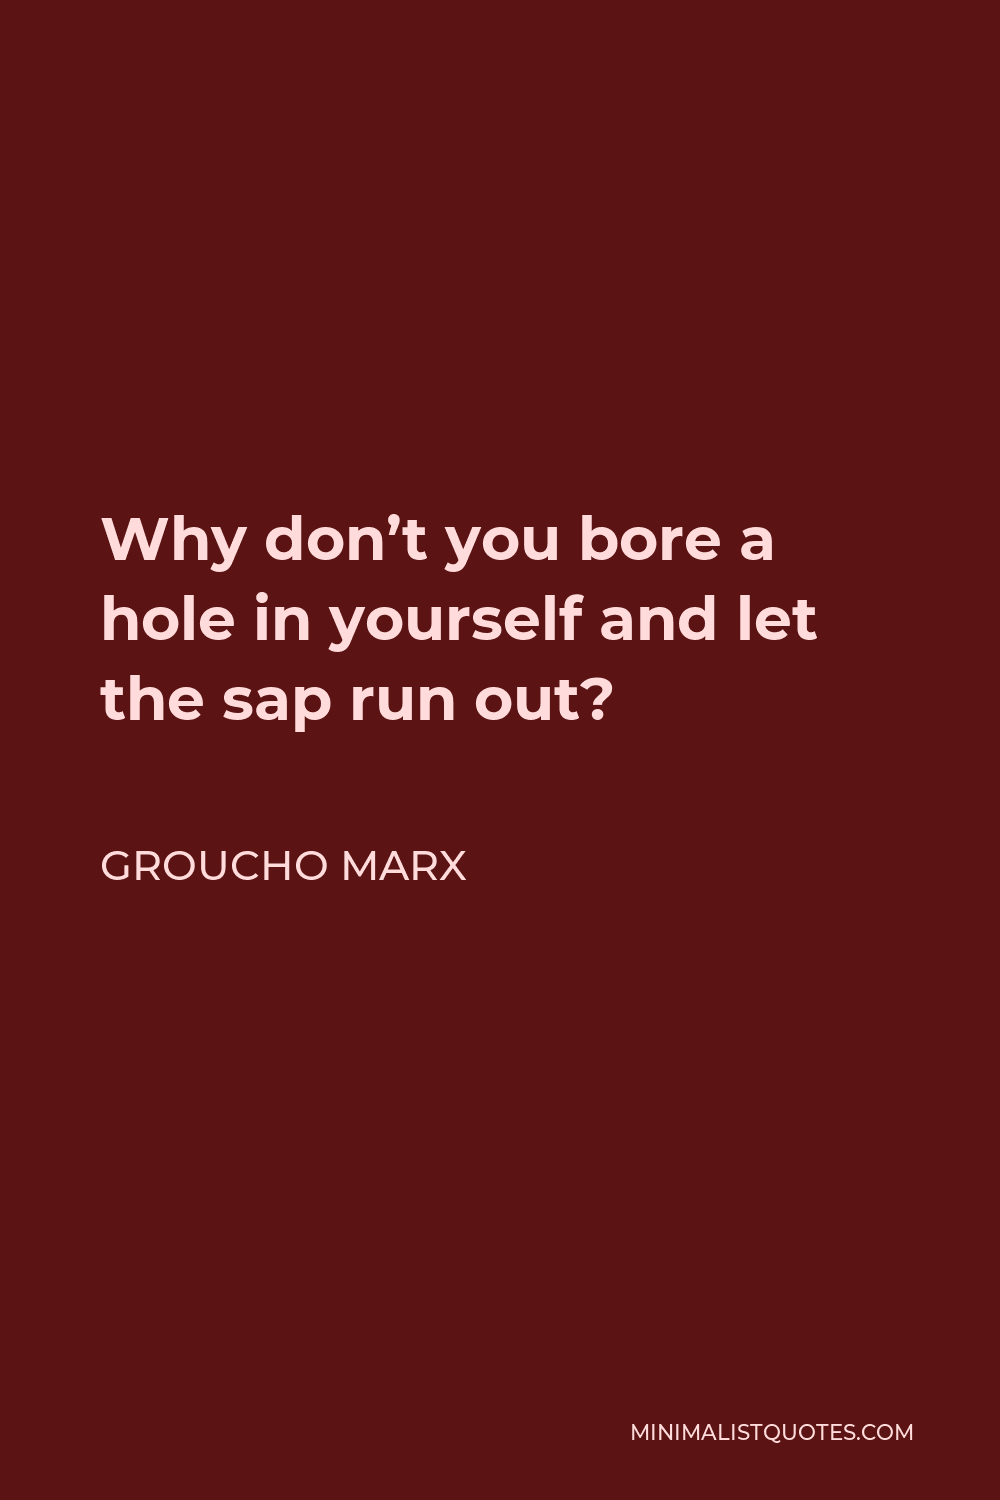 Groucho Marx Quote - Why don’t you bore a hole in yourself and let the sap run out?